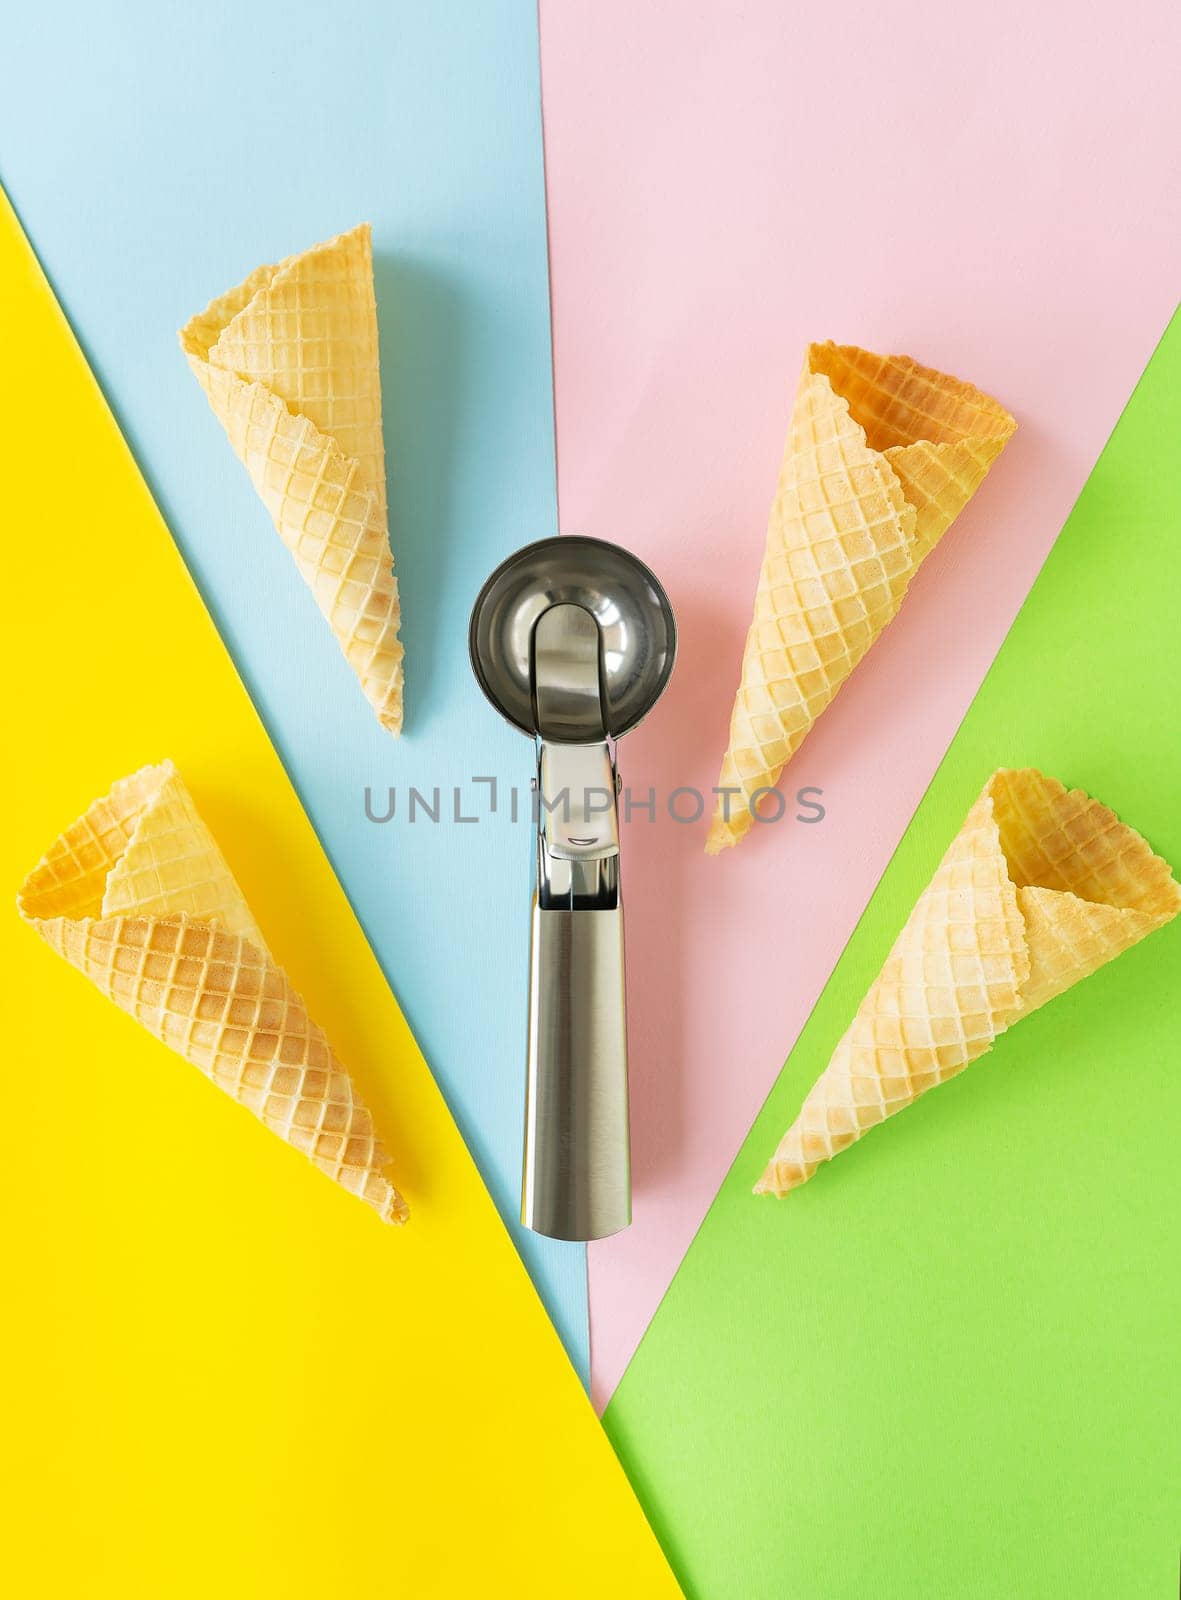 Wafer cups on a multi-colored bright background along with a metal spoon. Takeaway ice cream concept, vertical photo. by sfinks